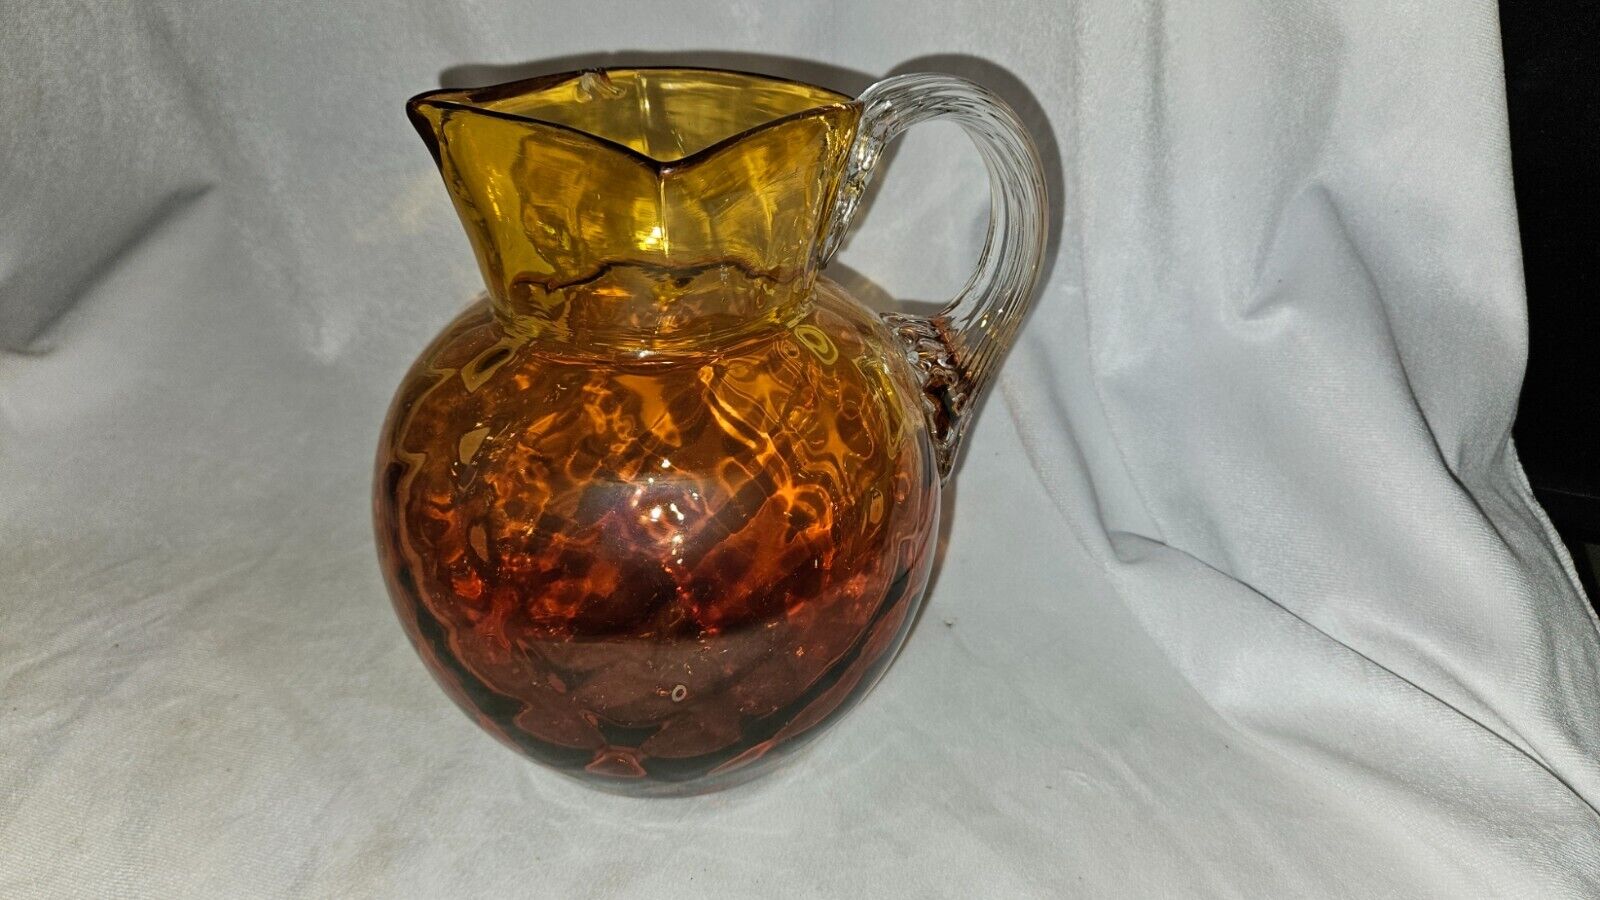 Antique Reverse Amberina Pitcher with Square Top, Reeded Handle, Swirl Pattern